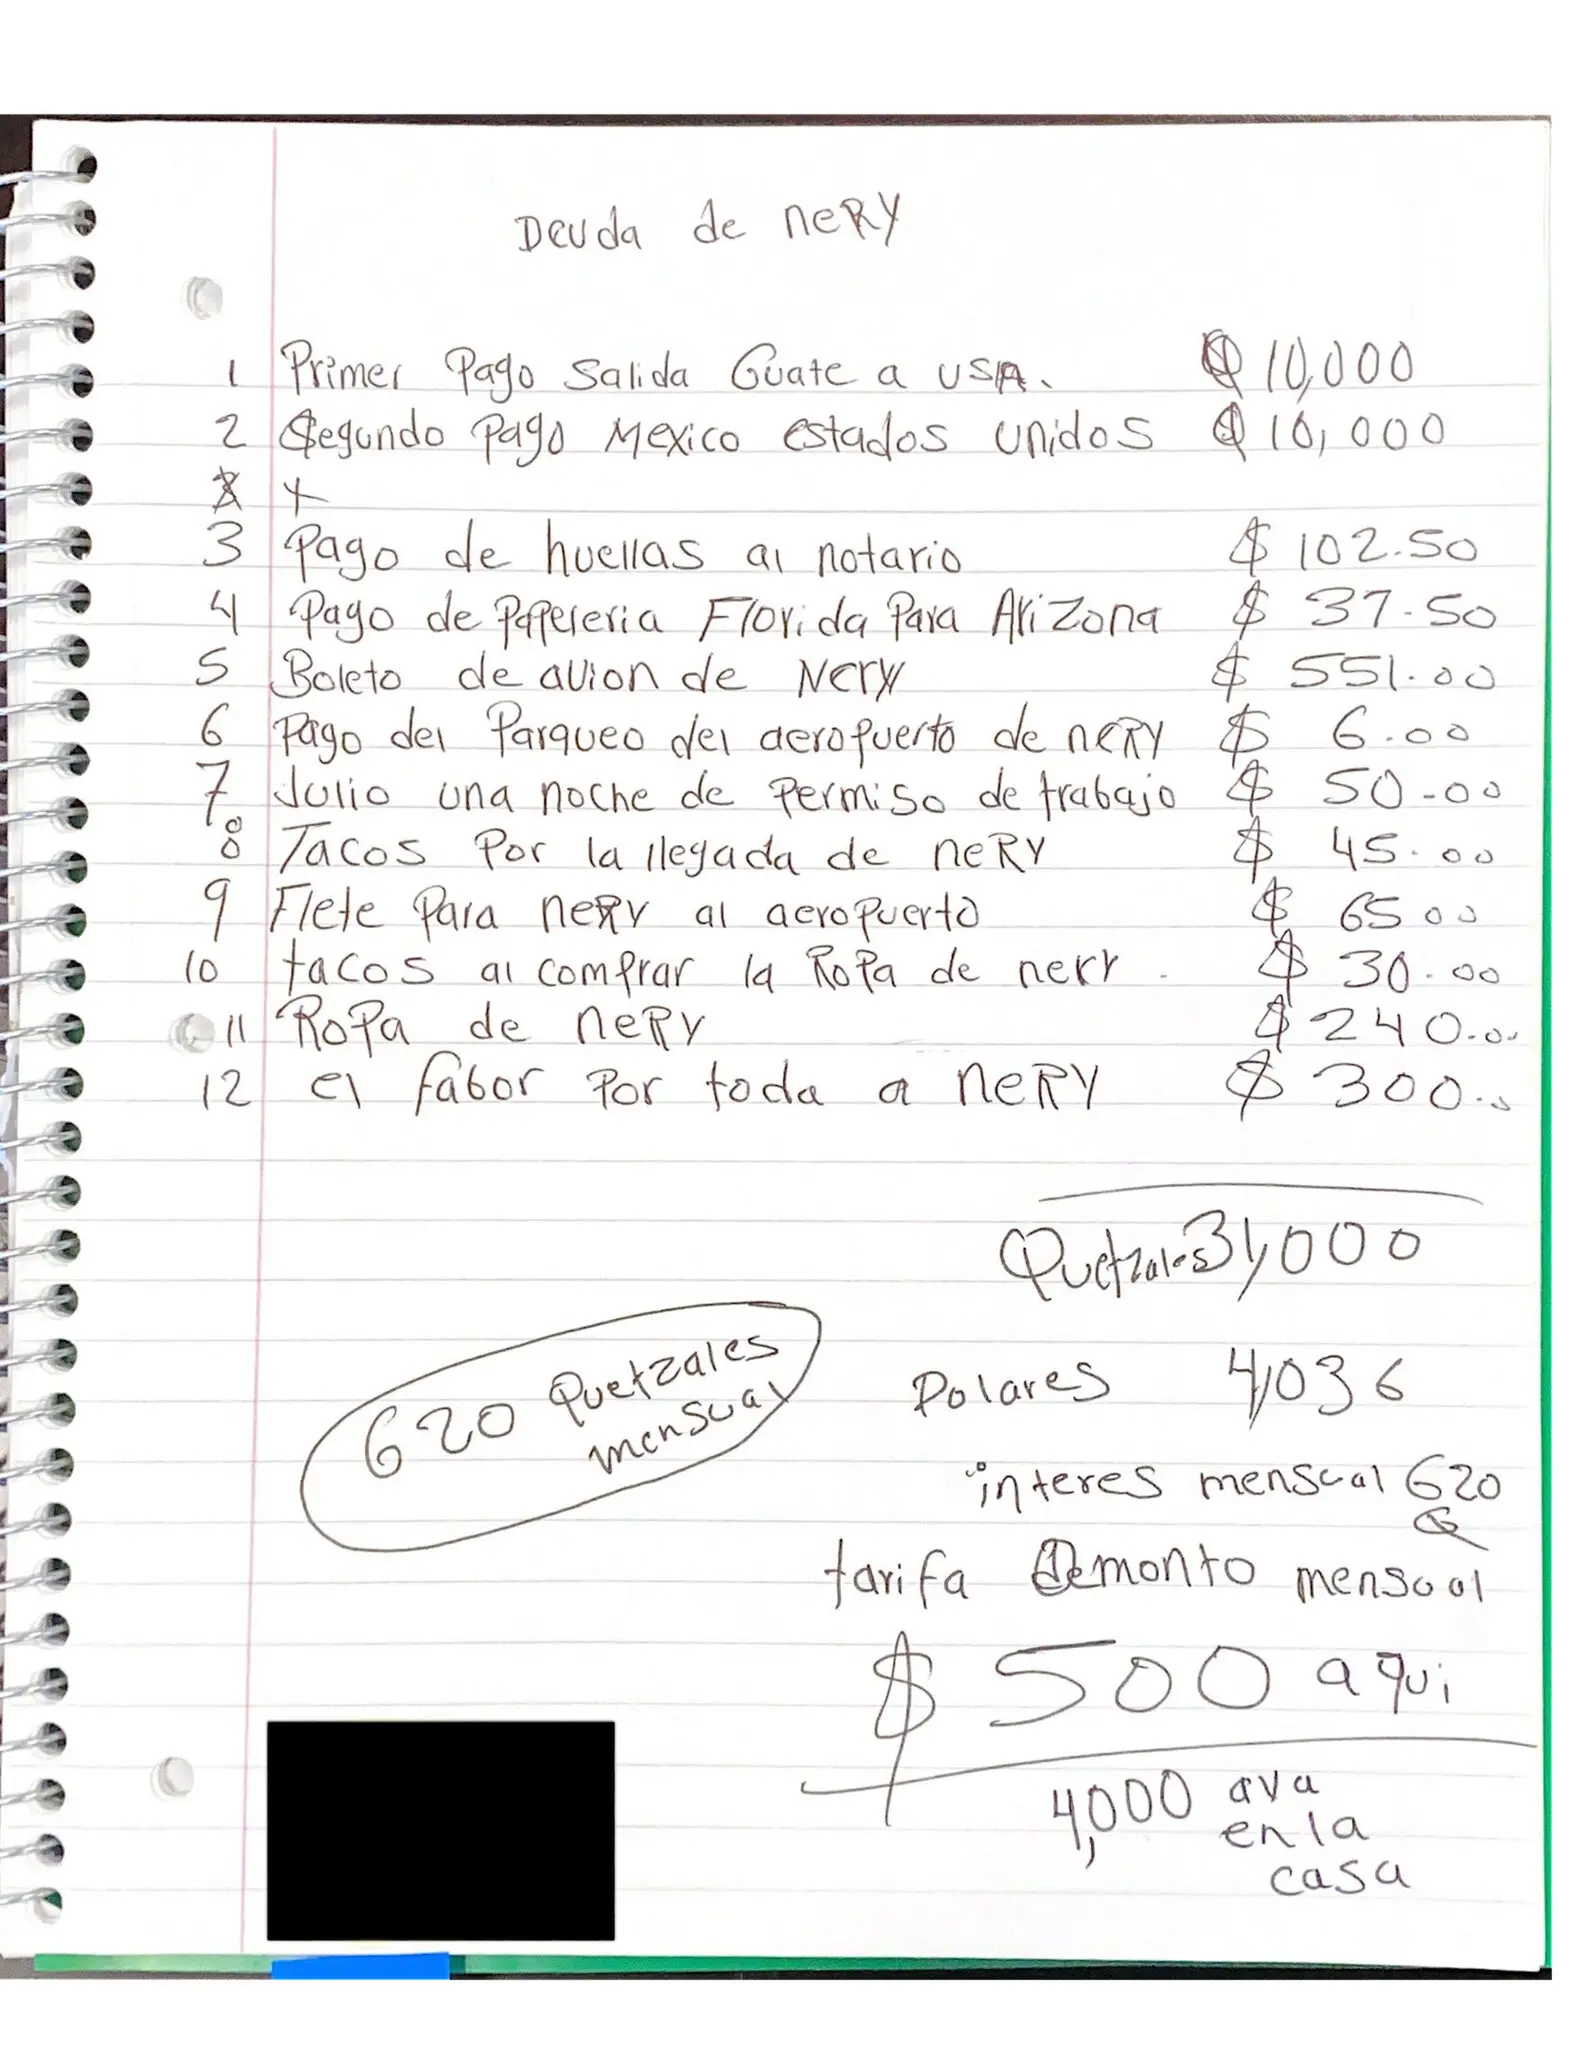 A handwritten ledger, in Spanish, of Nery Cutzal’s debts to his sponsor, including money for tacos and clothes. The child owed more than $4,000, plus interest. Court information has been redacted for privacy. Photo: The New York Times
